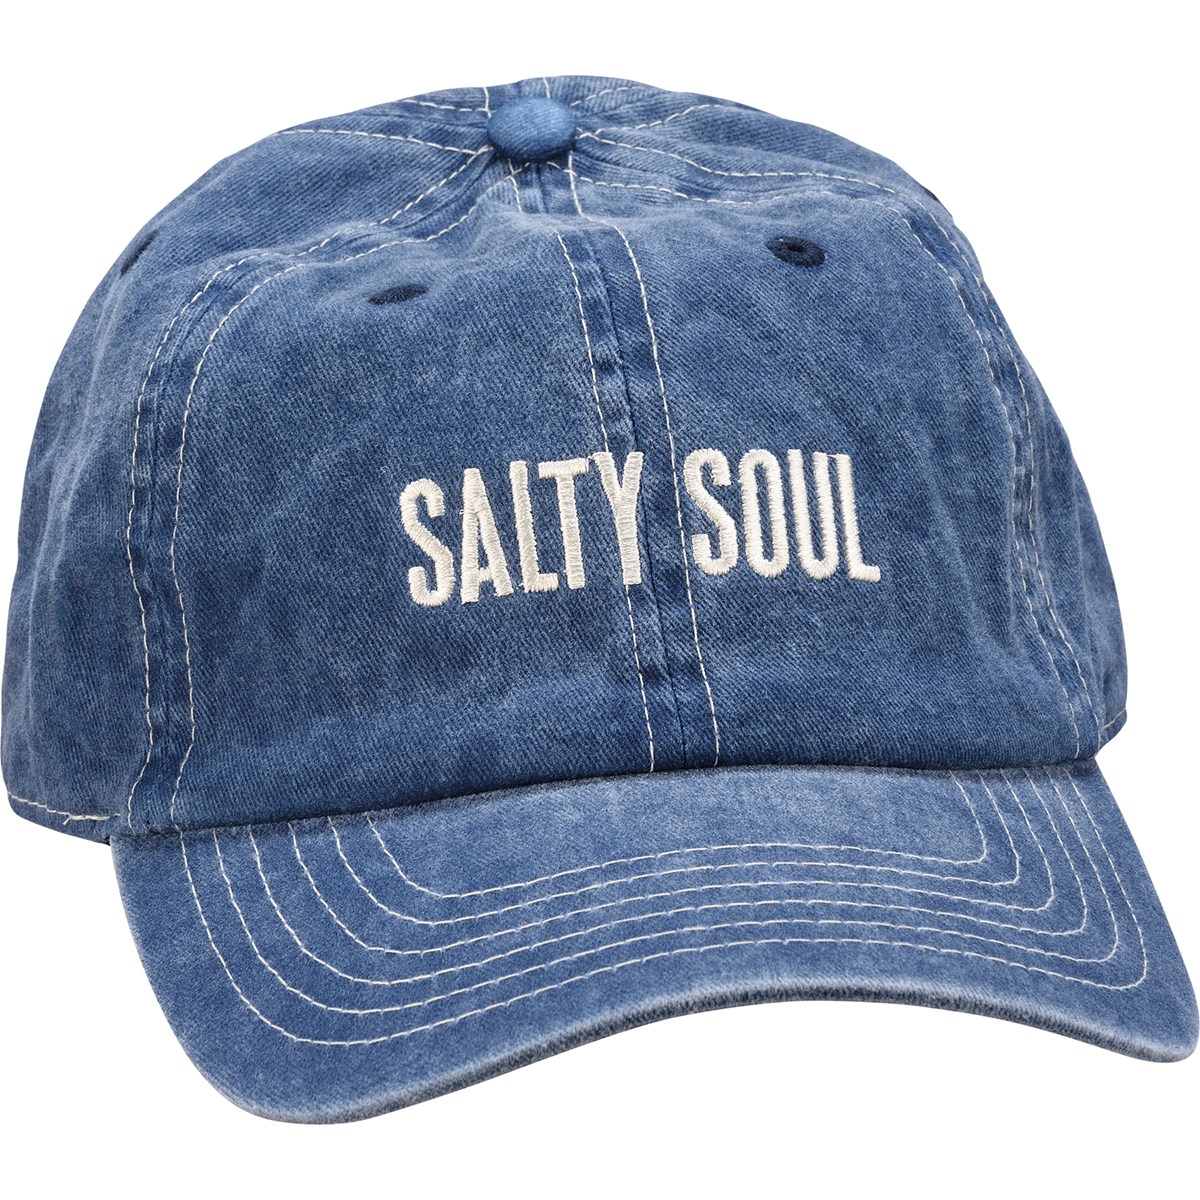 Baseball Cap - Salty Soul - One Size Fits Most - Cotton, Metal